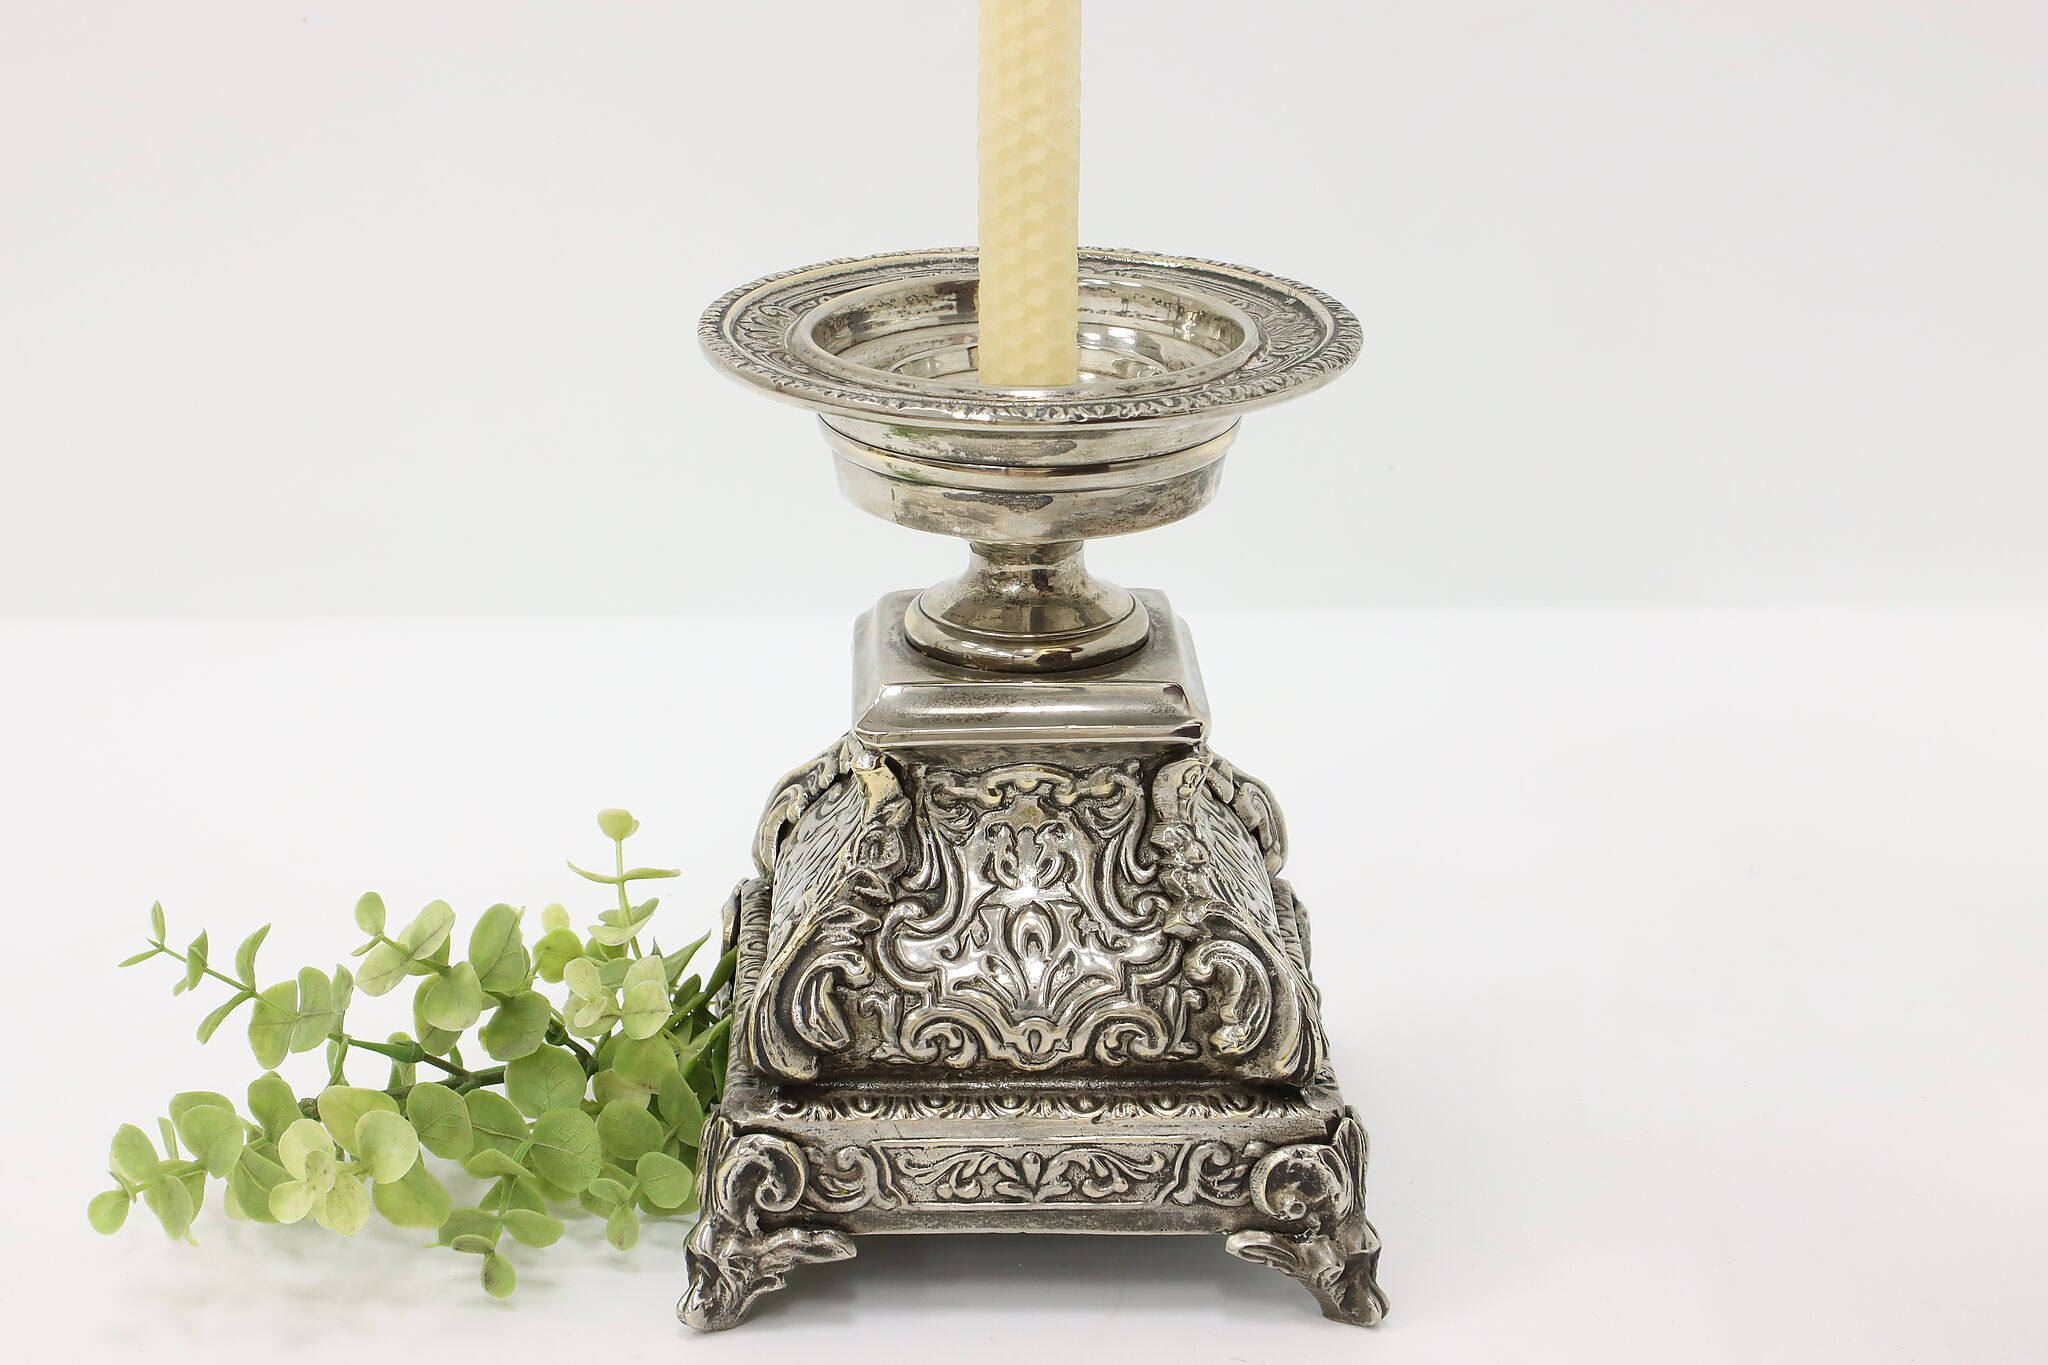 English victorian silver plate candleholder